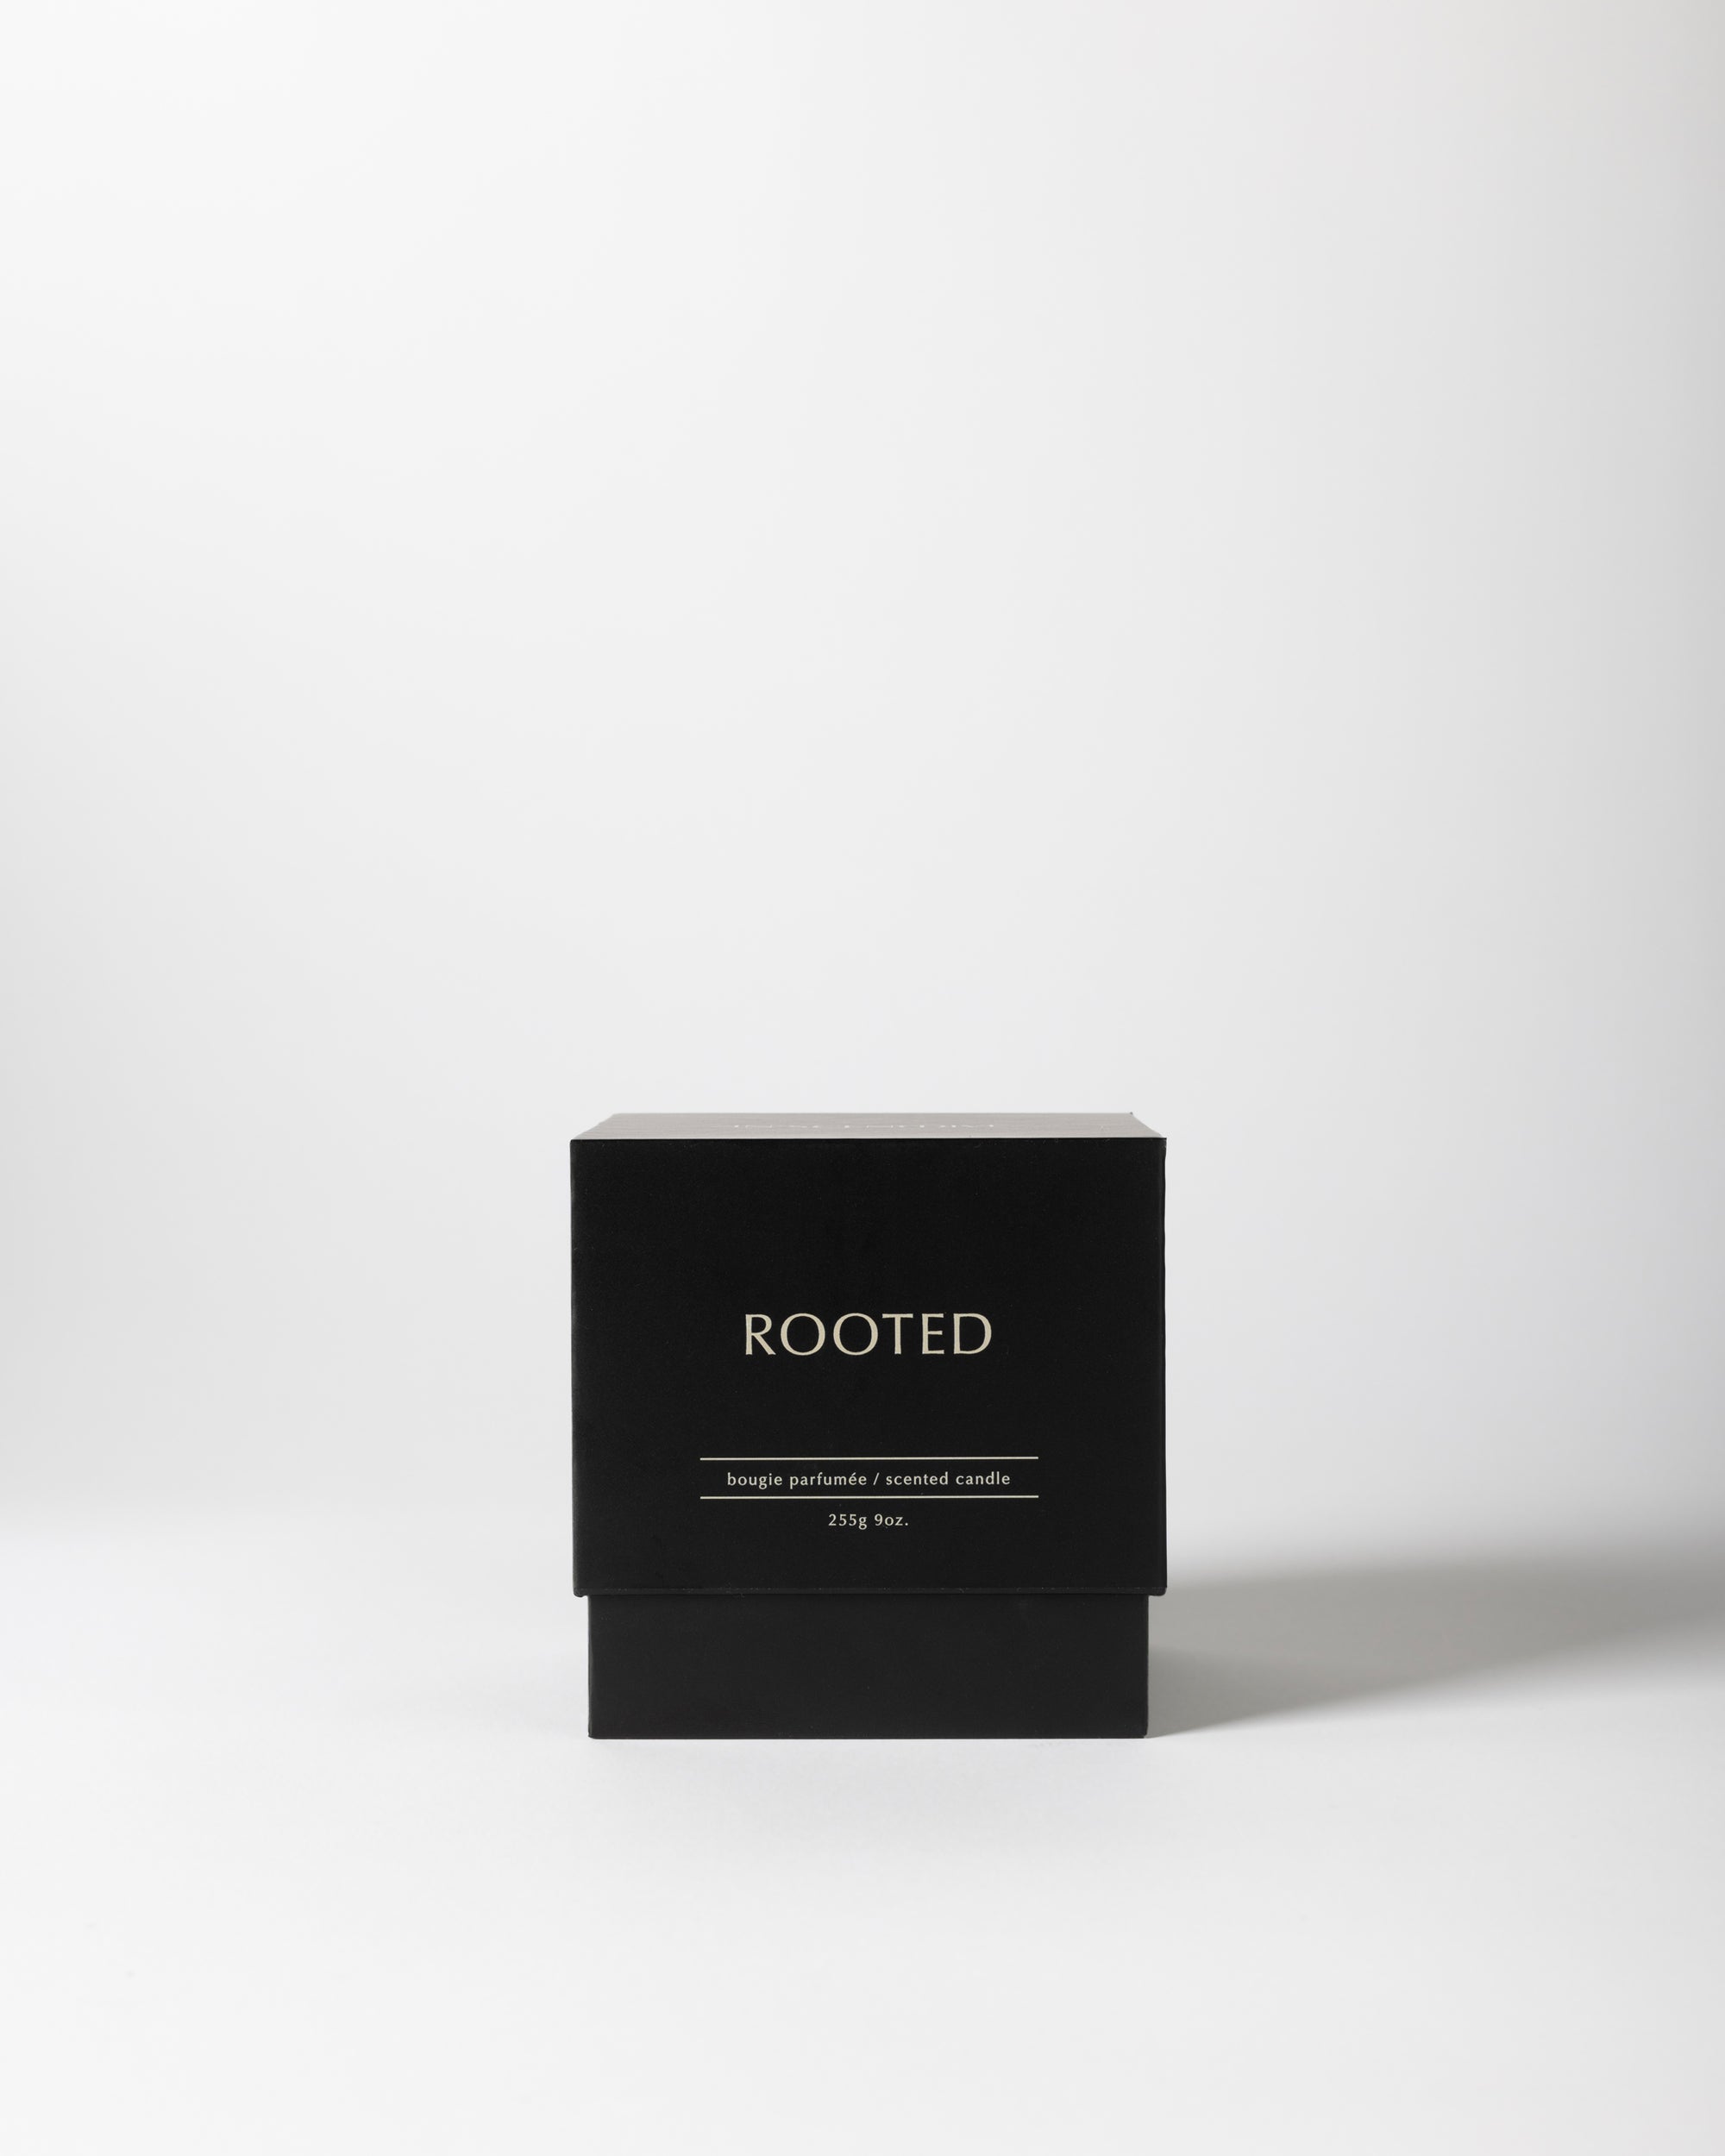 This is the perfect affordable luxury candle. It is the ideal luxury gift for men or women; having a unisex scent that will fill up a room with an aroma of a tobacco vanilla fragrance. This scented candle is made with 100% soy wax and aesthetically packaged, making it a great luxury gift or apart of a gift set.